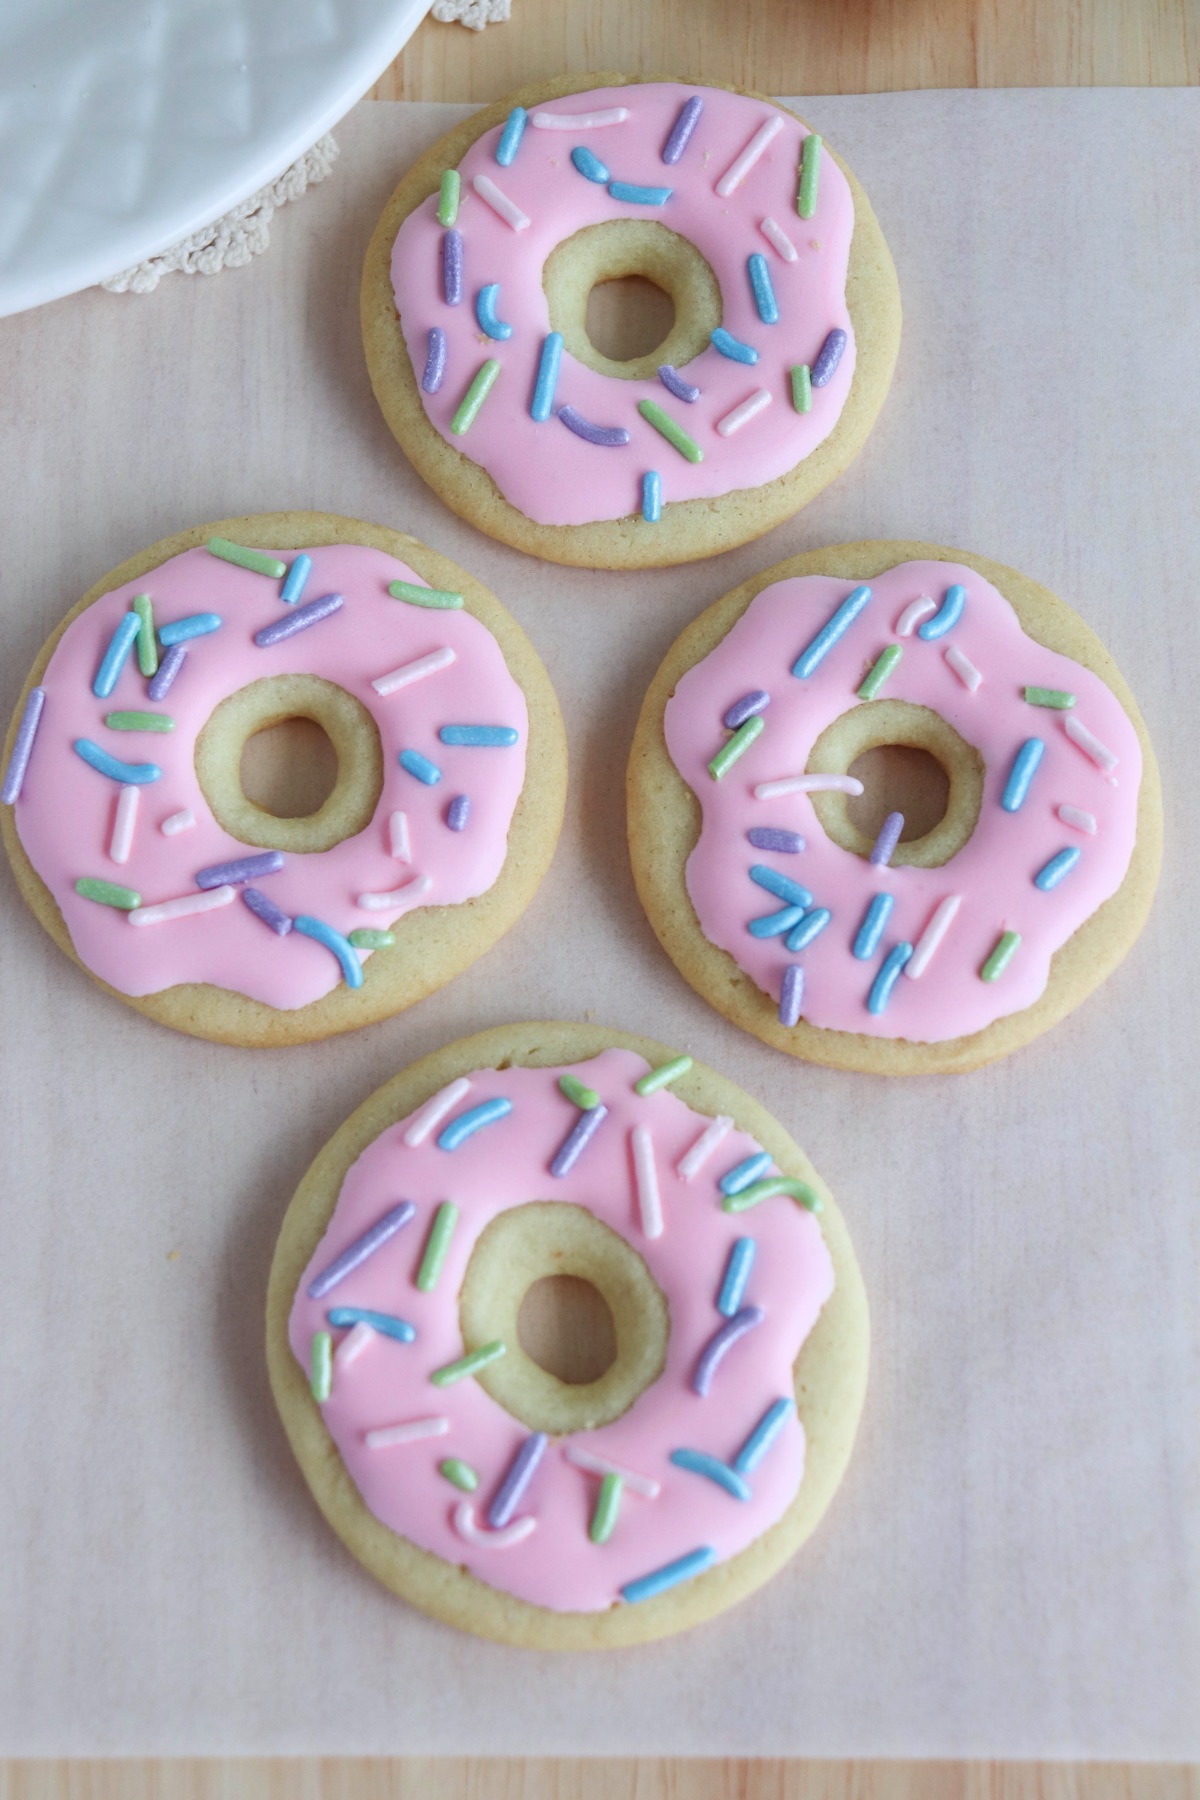 finished cookie decorating idea with donut cookies